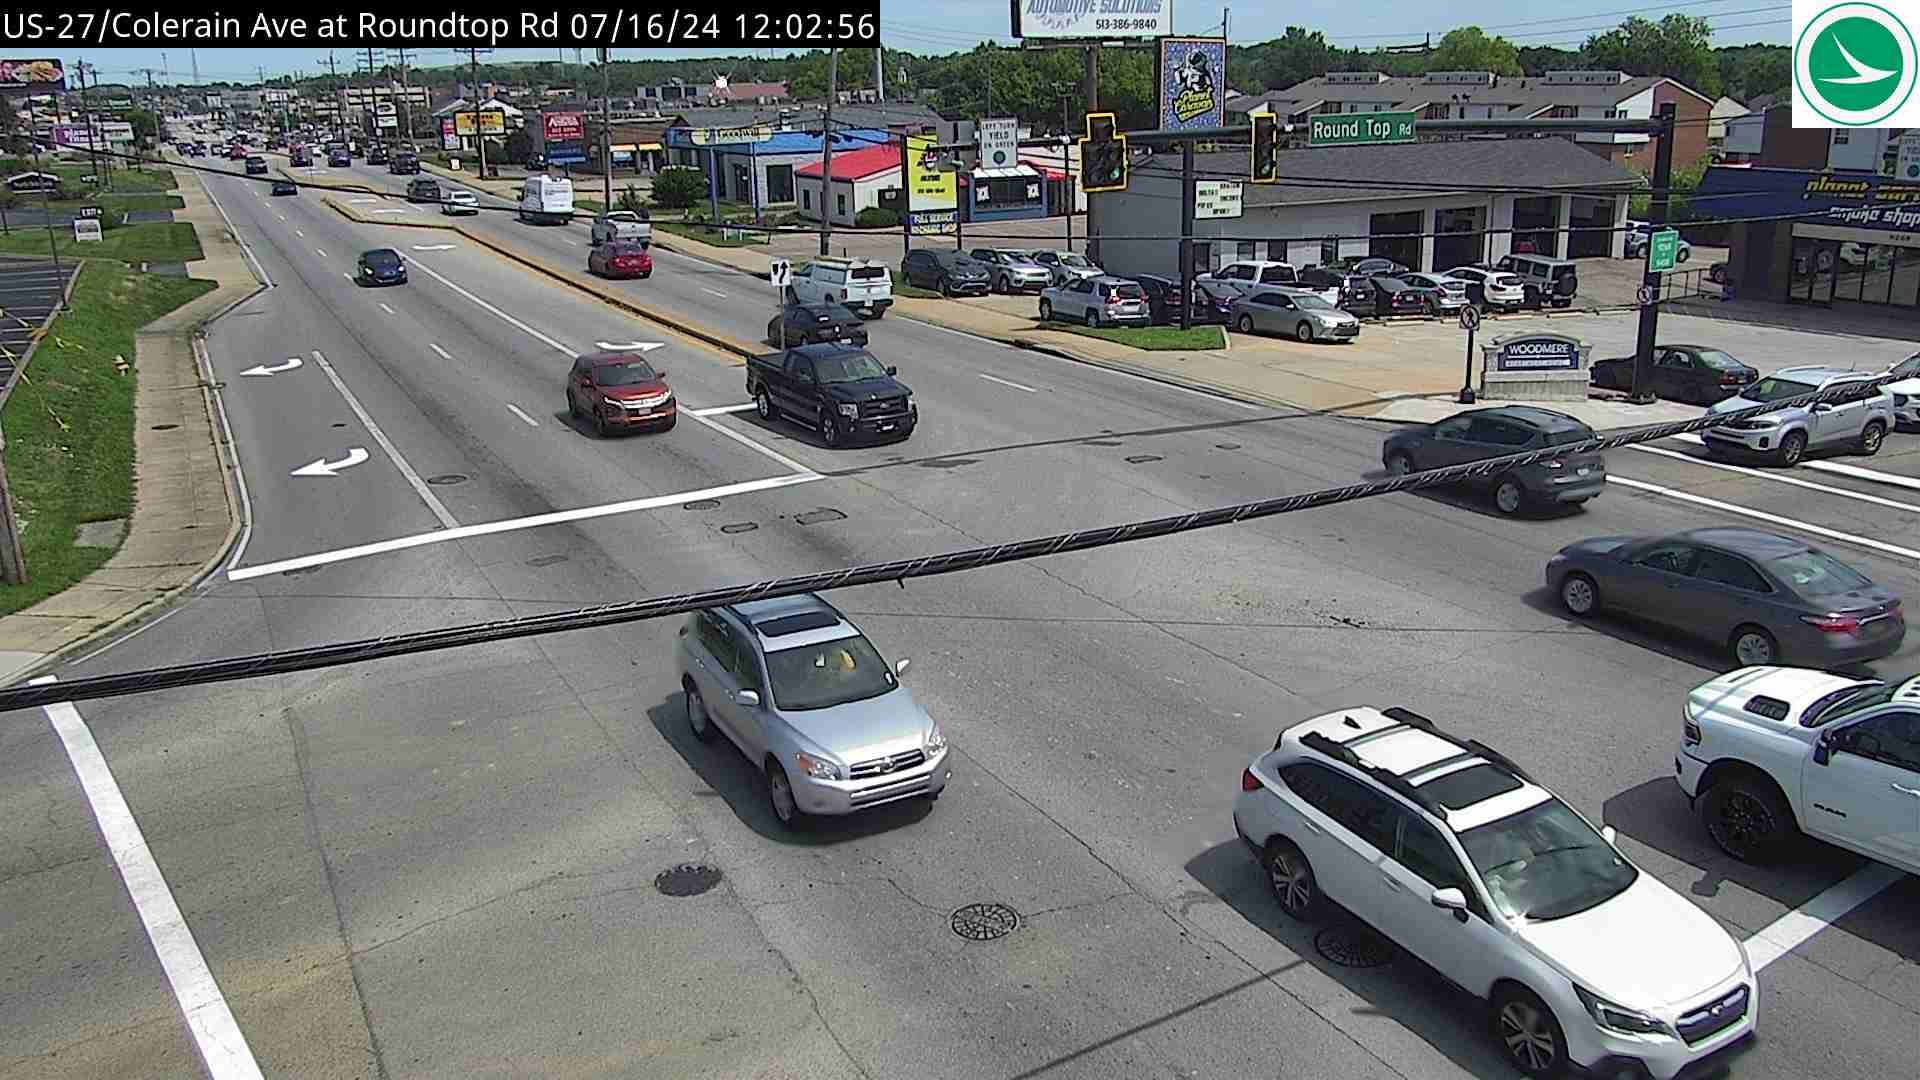 Traffic Cam Colerain Heights: US-27 at Roundtop Rd